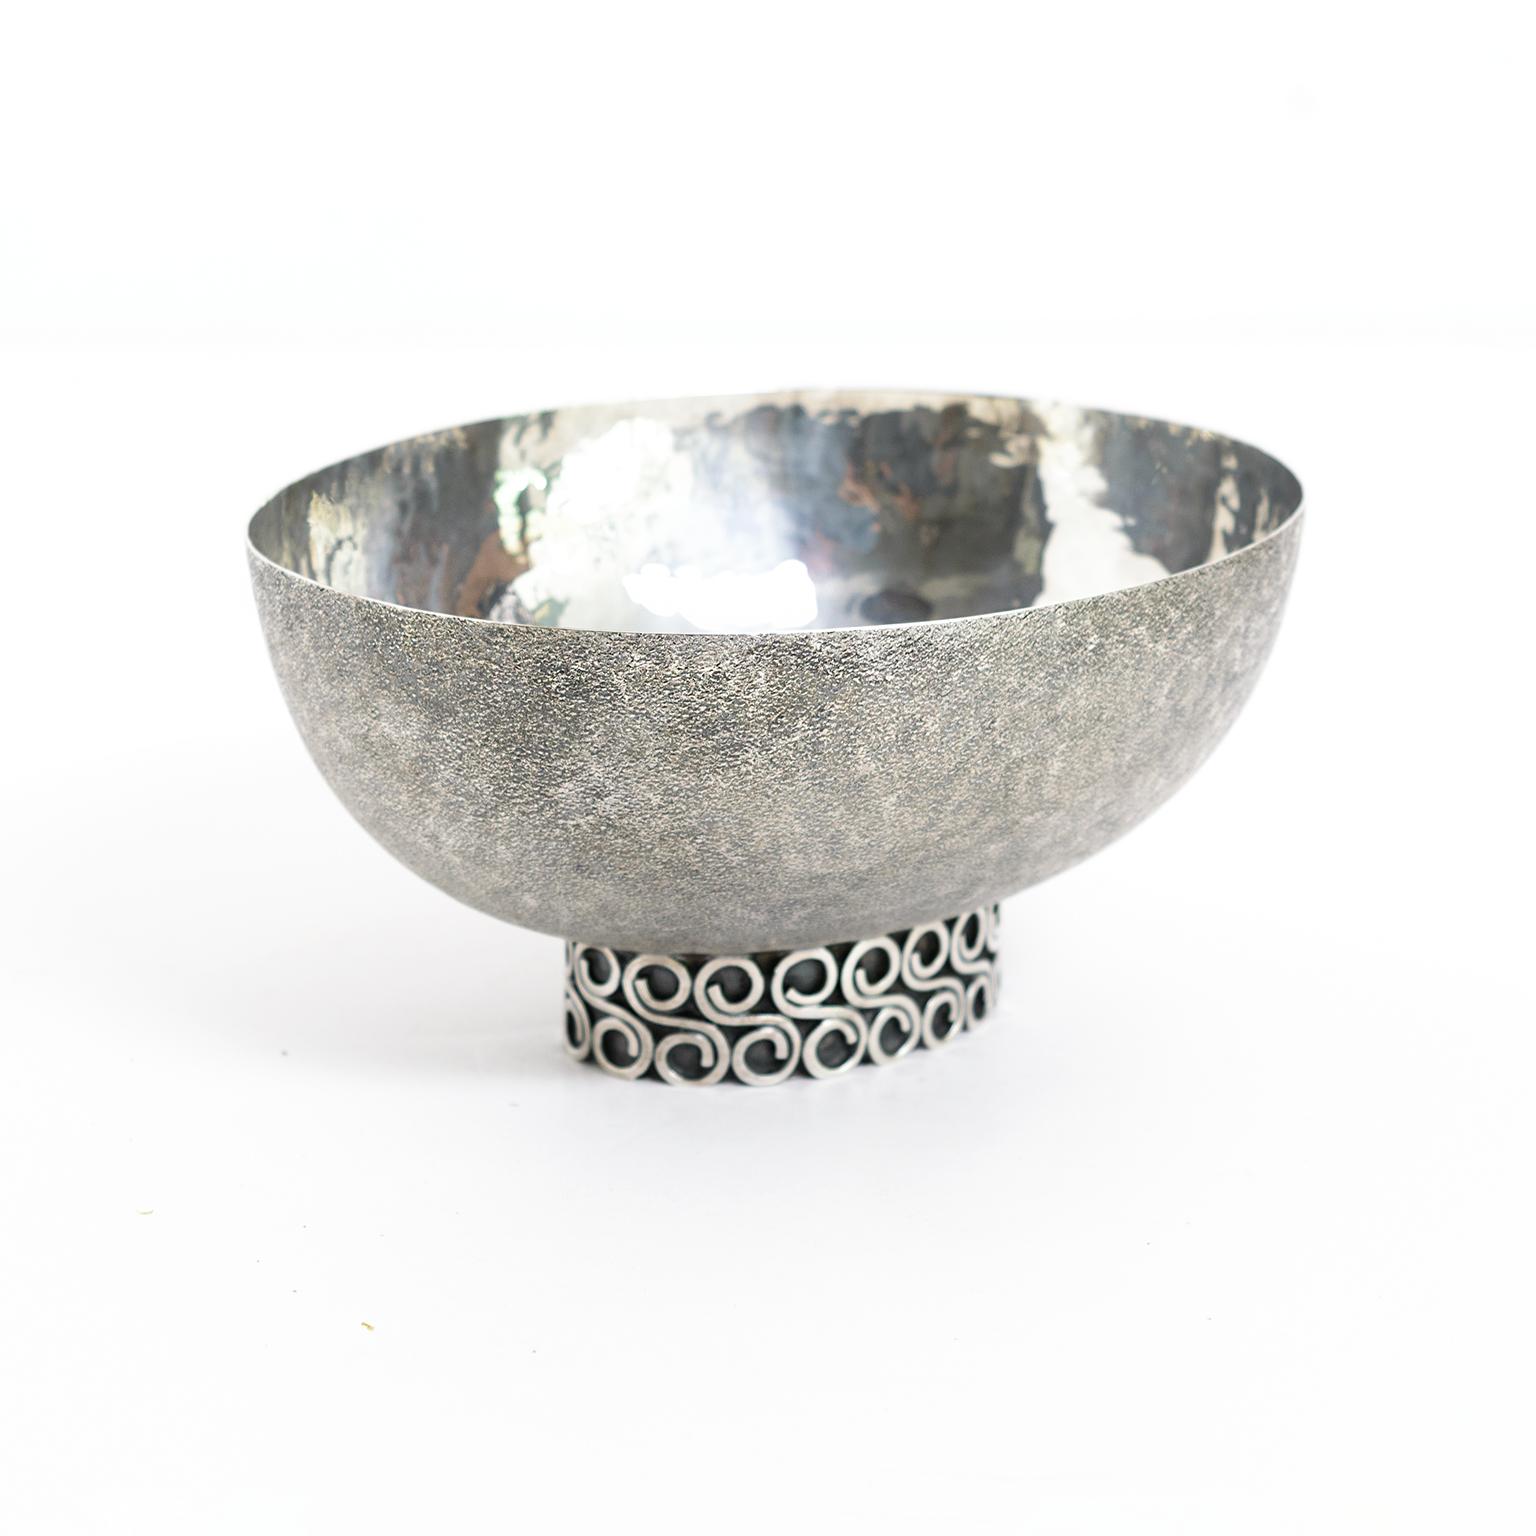 Viennese mid-century period silver bowl. The bowl is of oval form, with an oxidised surface externally, and a planished interior. The bowl is stamped 